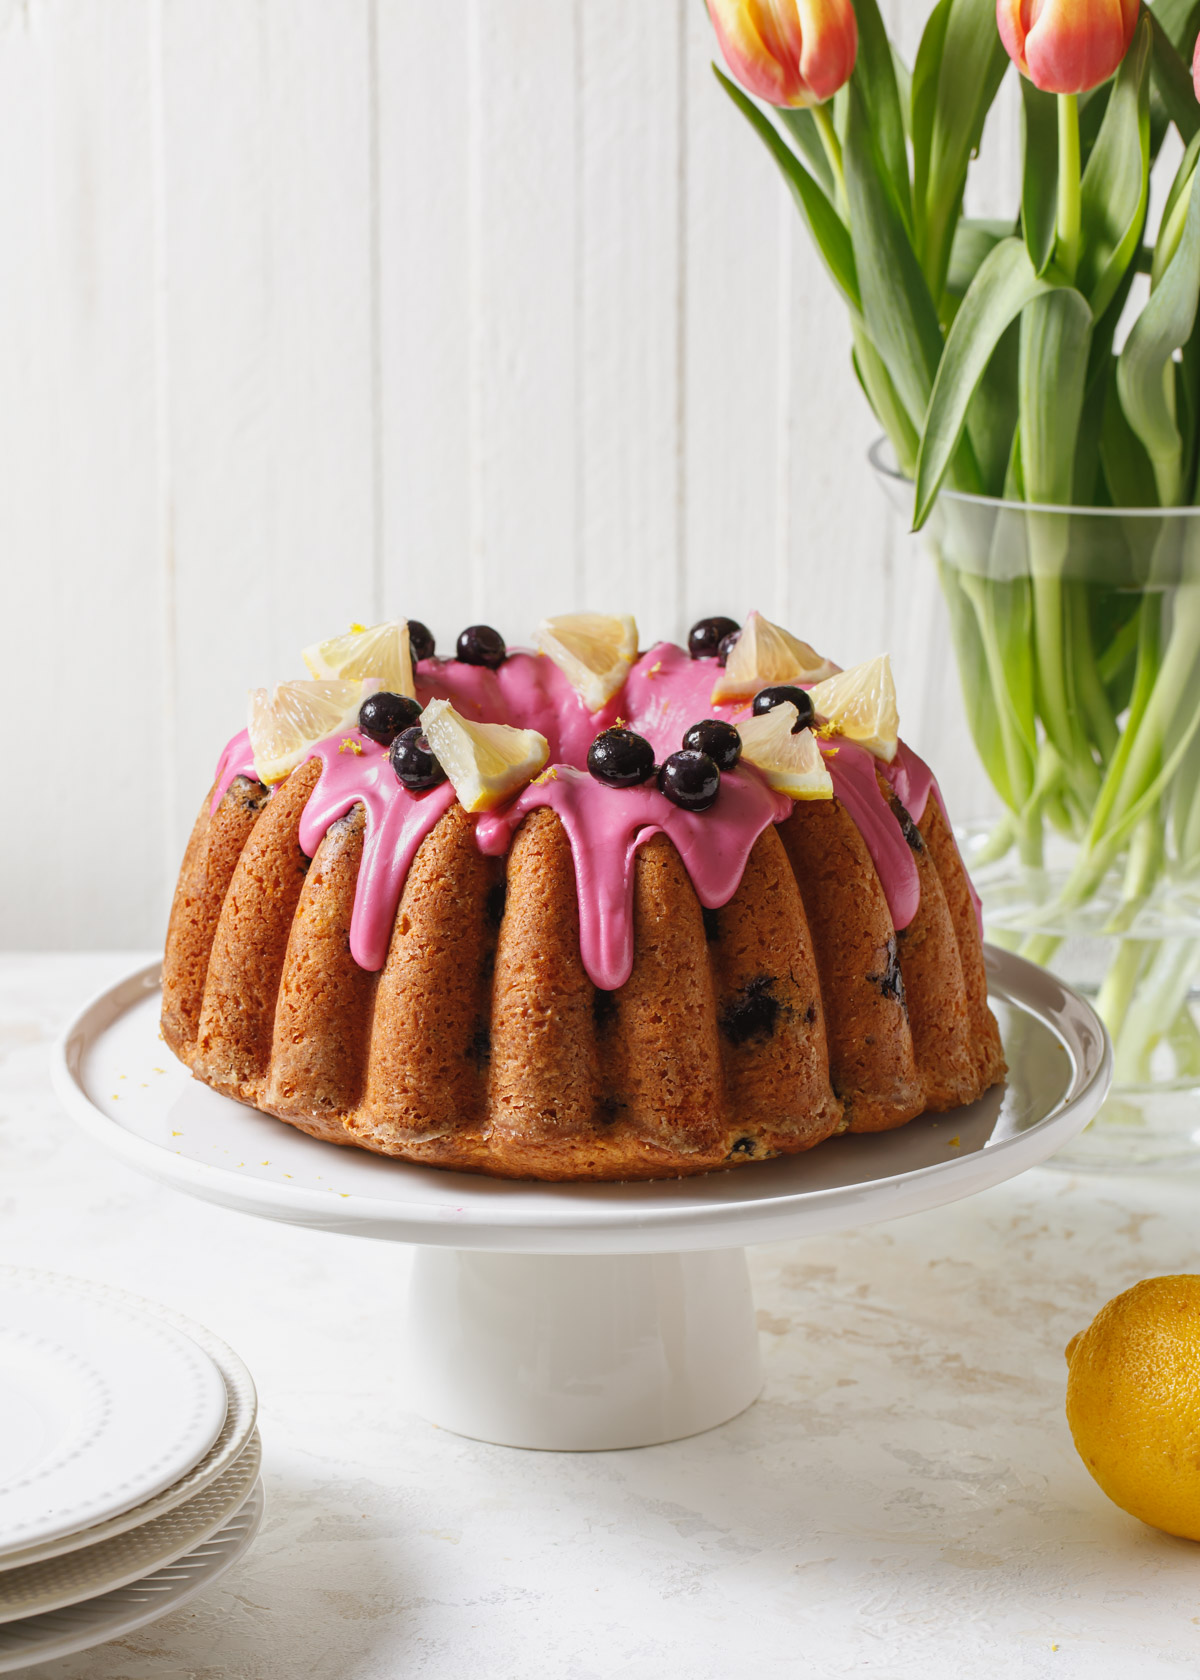 A lemon blueberry bundt cake with blueberry icing and decorated with lemon slices on a white cake stand with flowers in the background